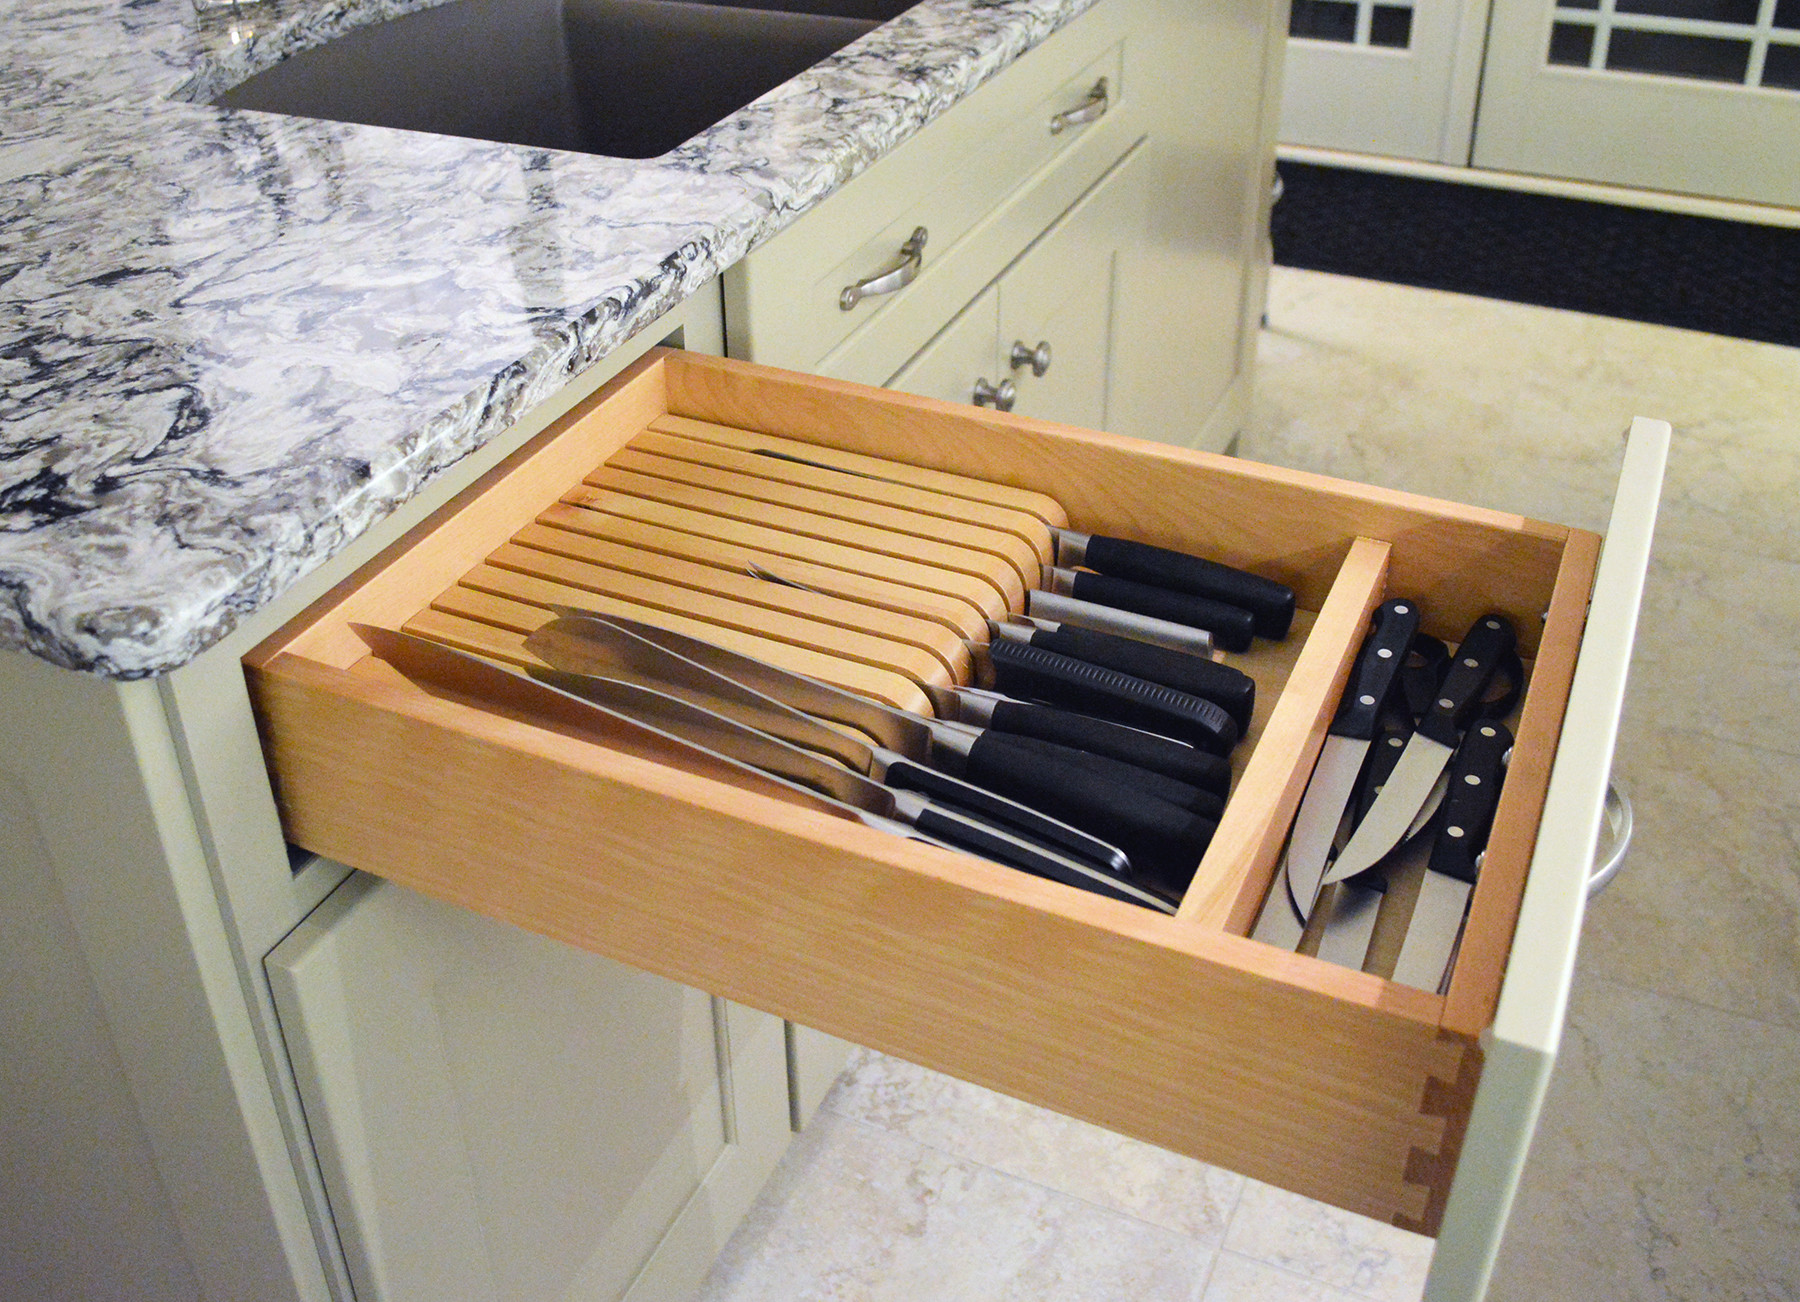 Kitchen Knives Storage
 How to Design a Kitchen Like a Pro